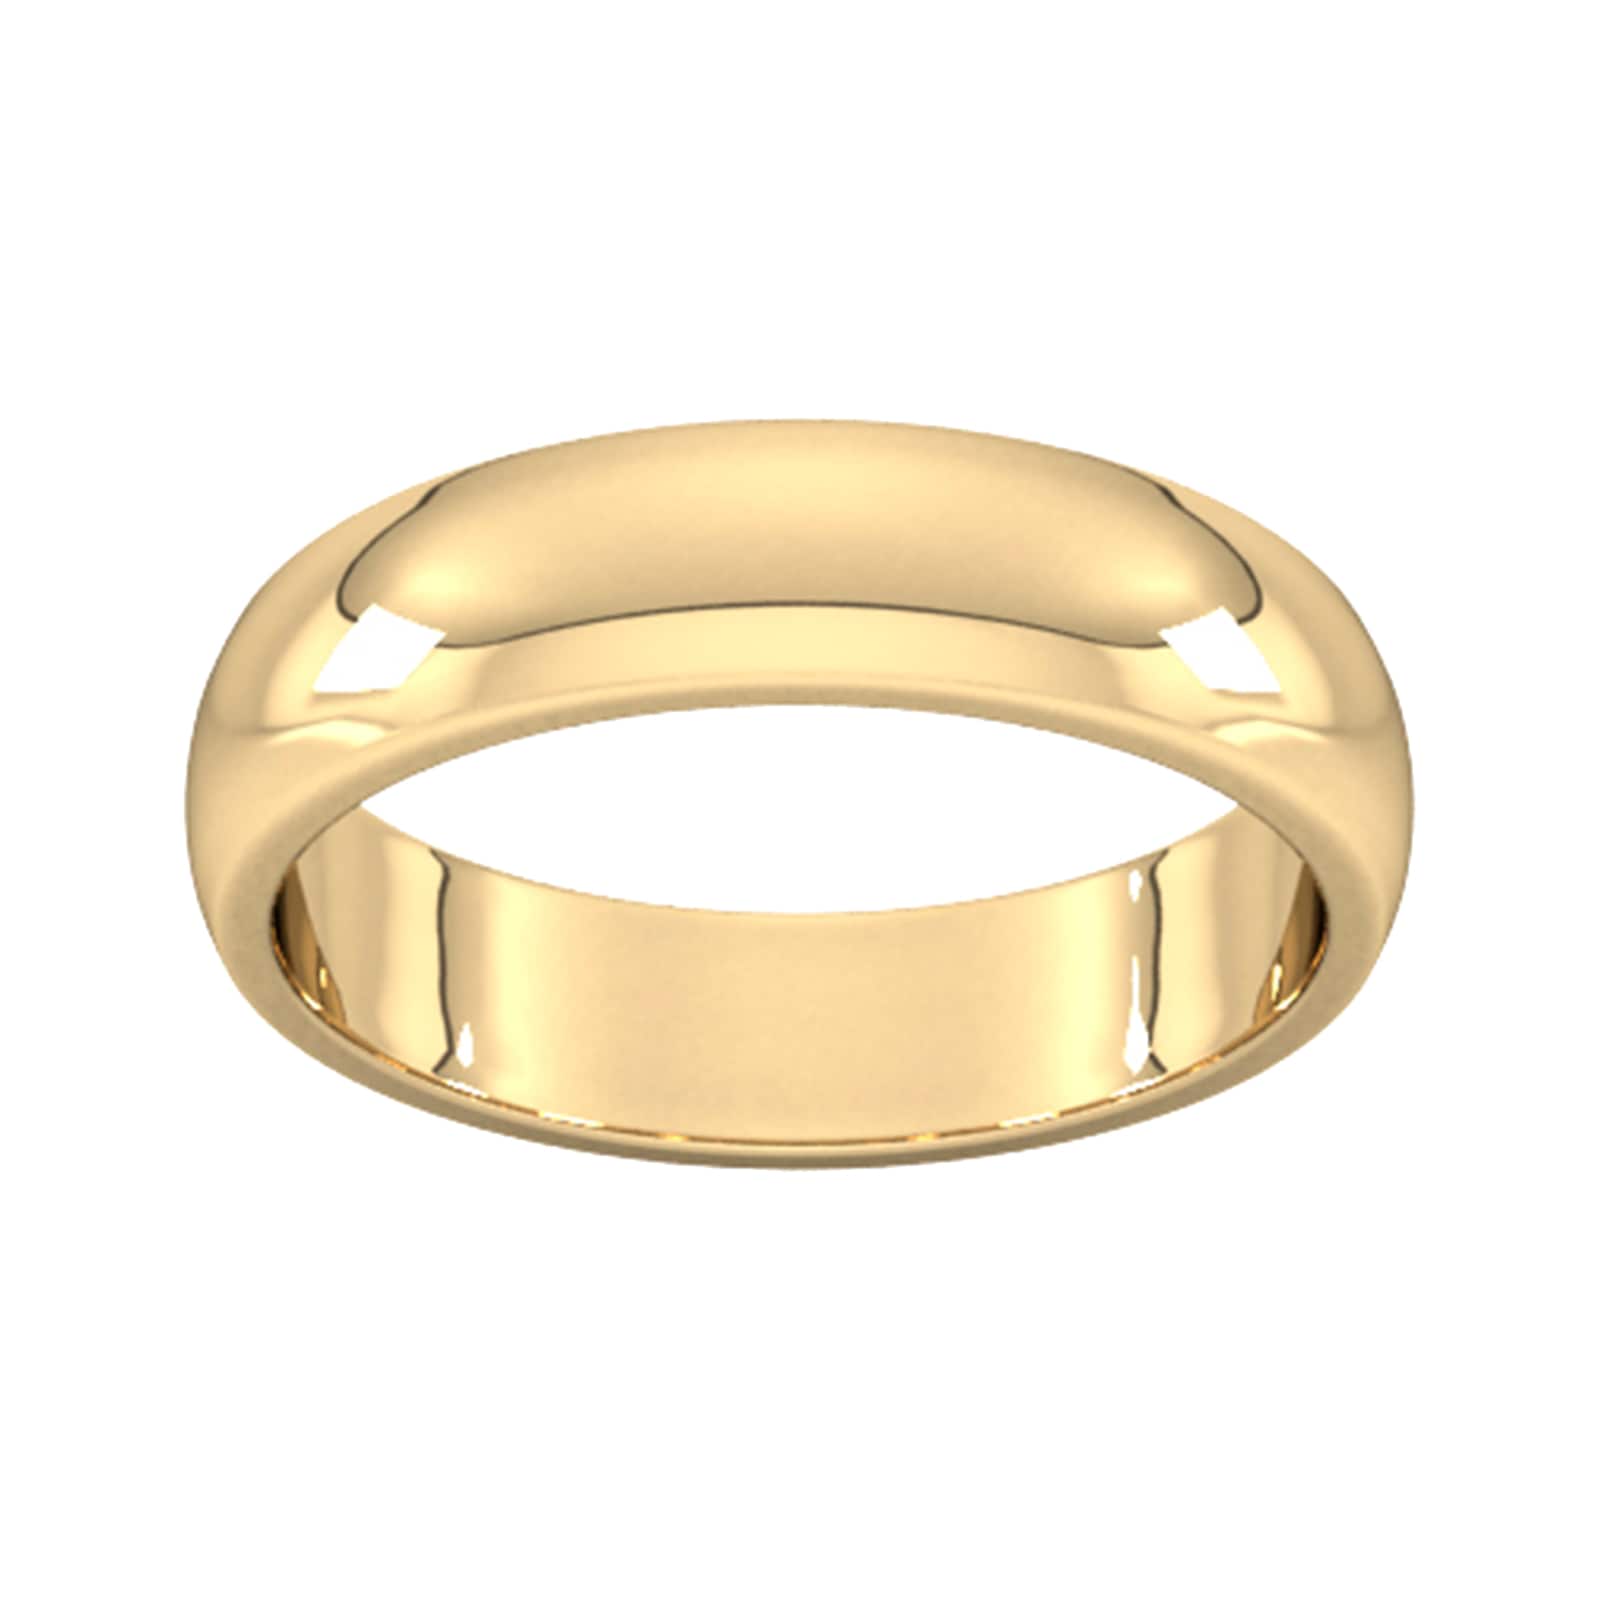 5mm D Shape Heavy Wedding Ring In 9 Carat Yellow Gold - Ring Size Z